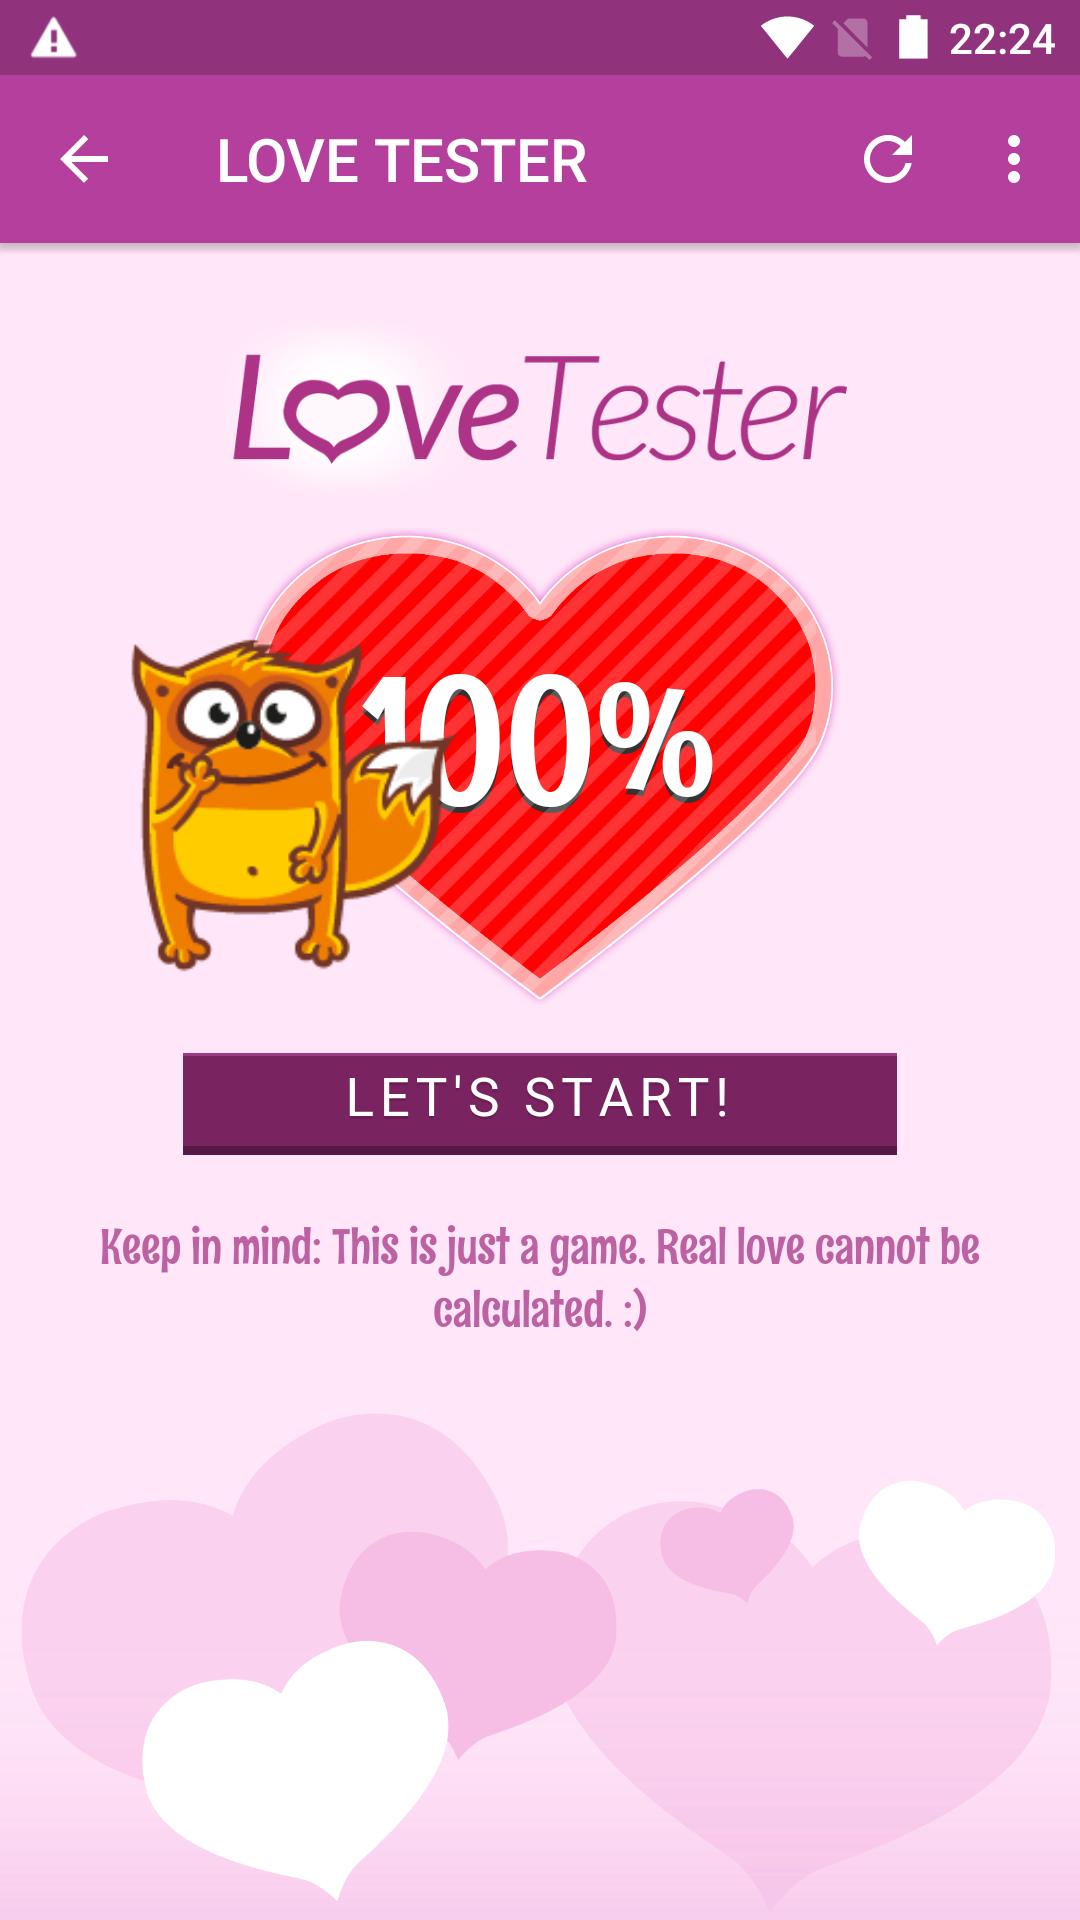 Game love tester The Love